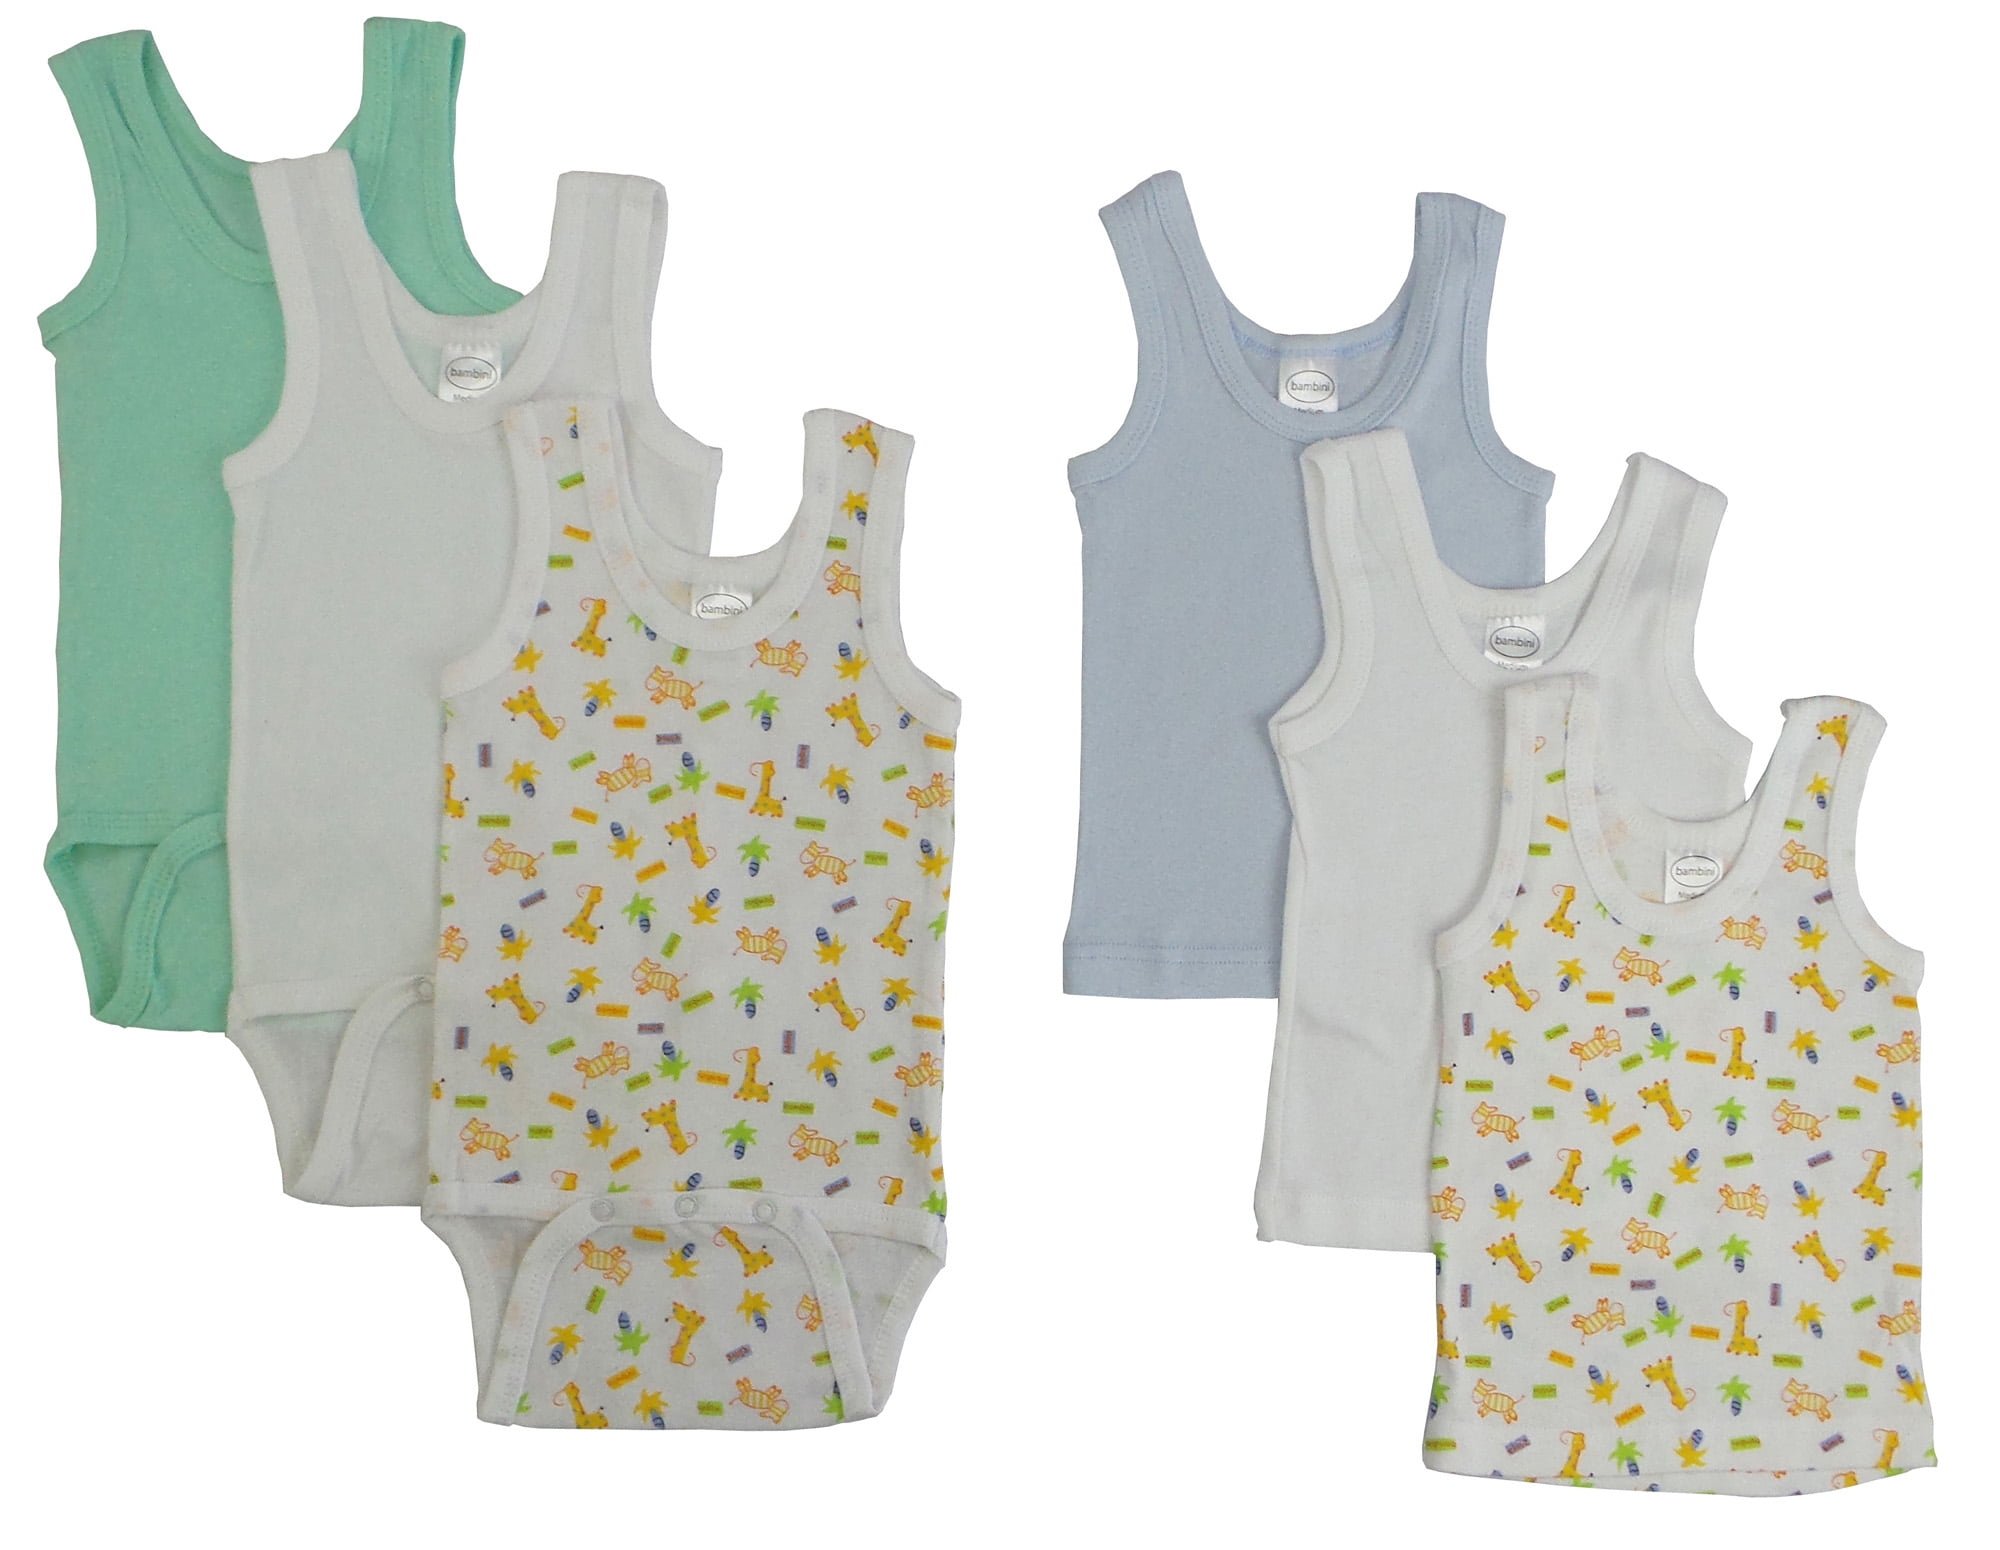 Cs-109s-037s Boys Printed Tank Top, Assorted - Small